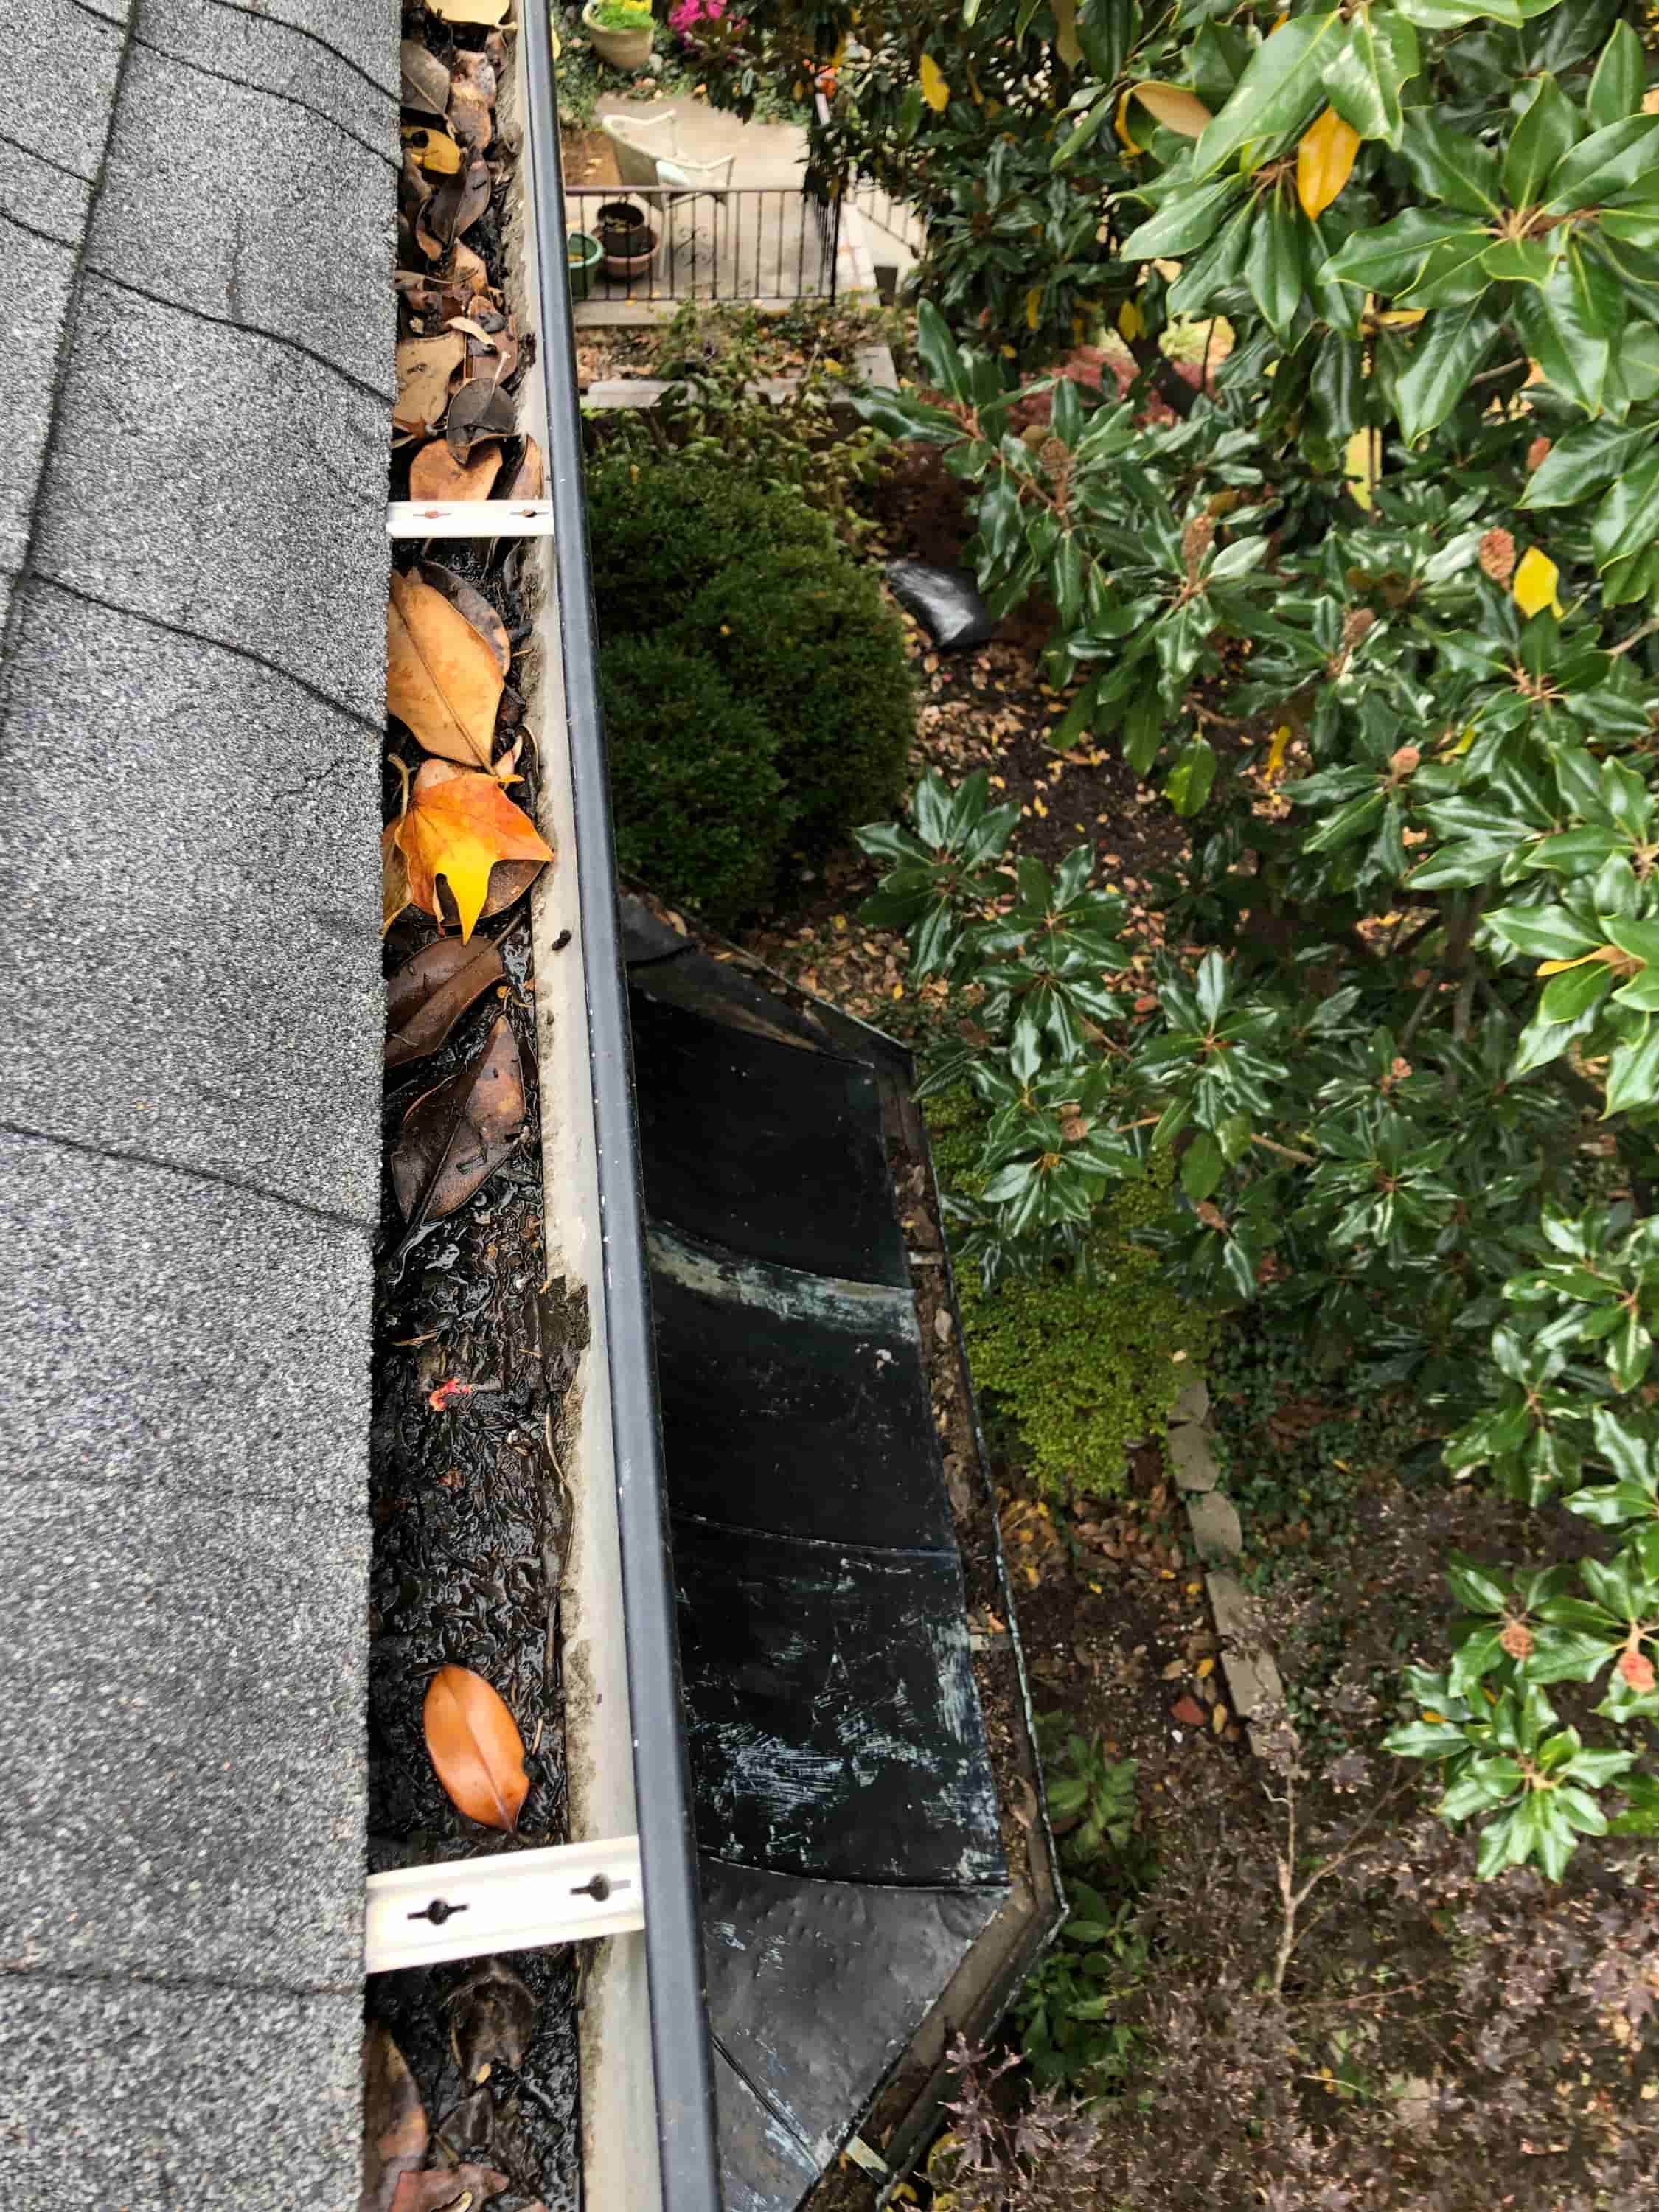 long pole to clean gutters